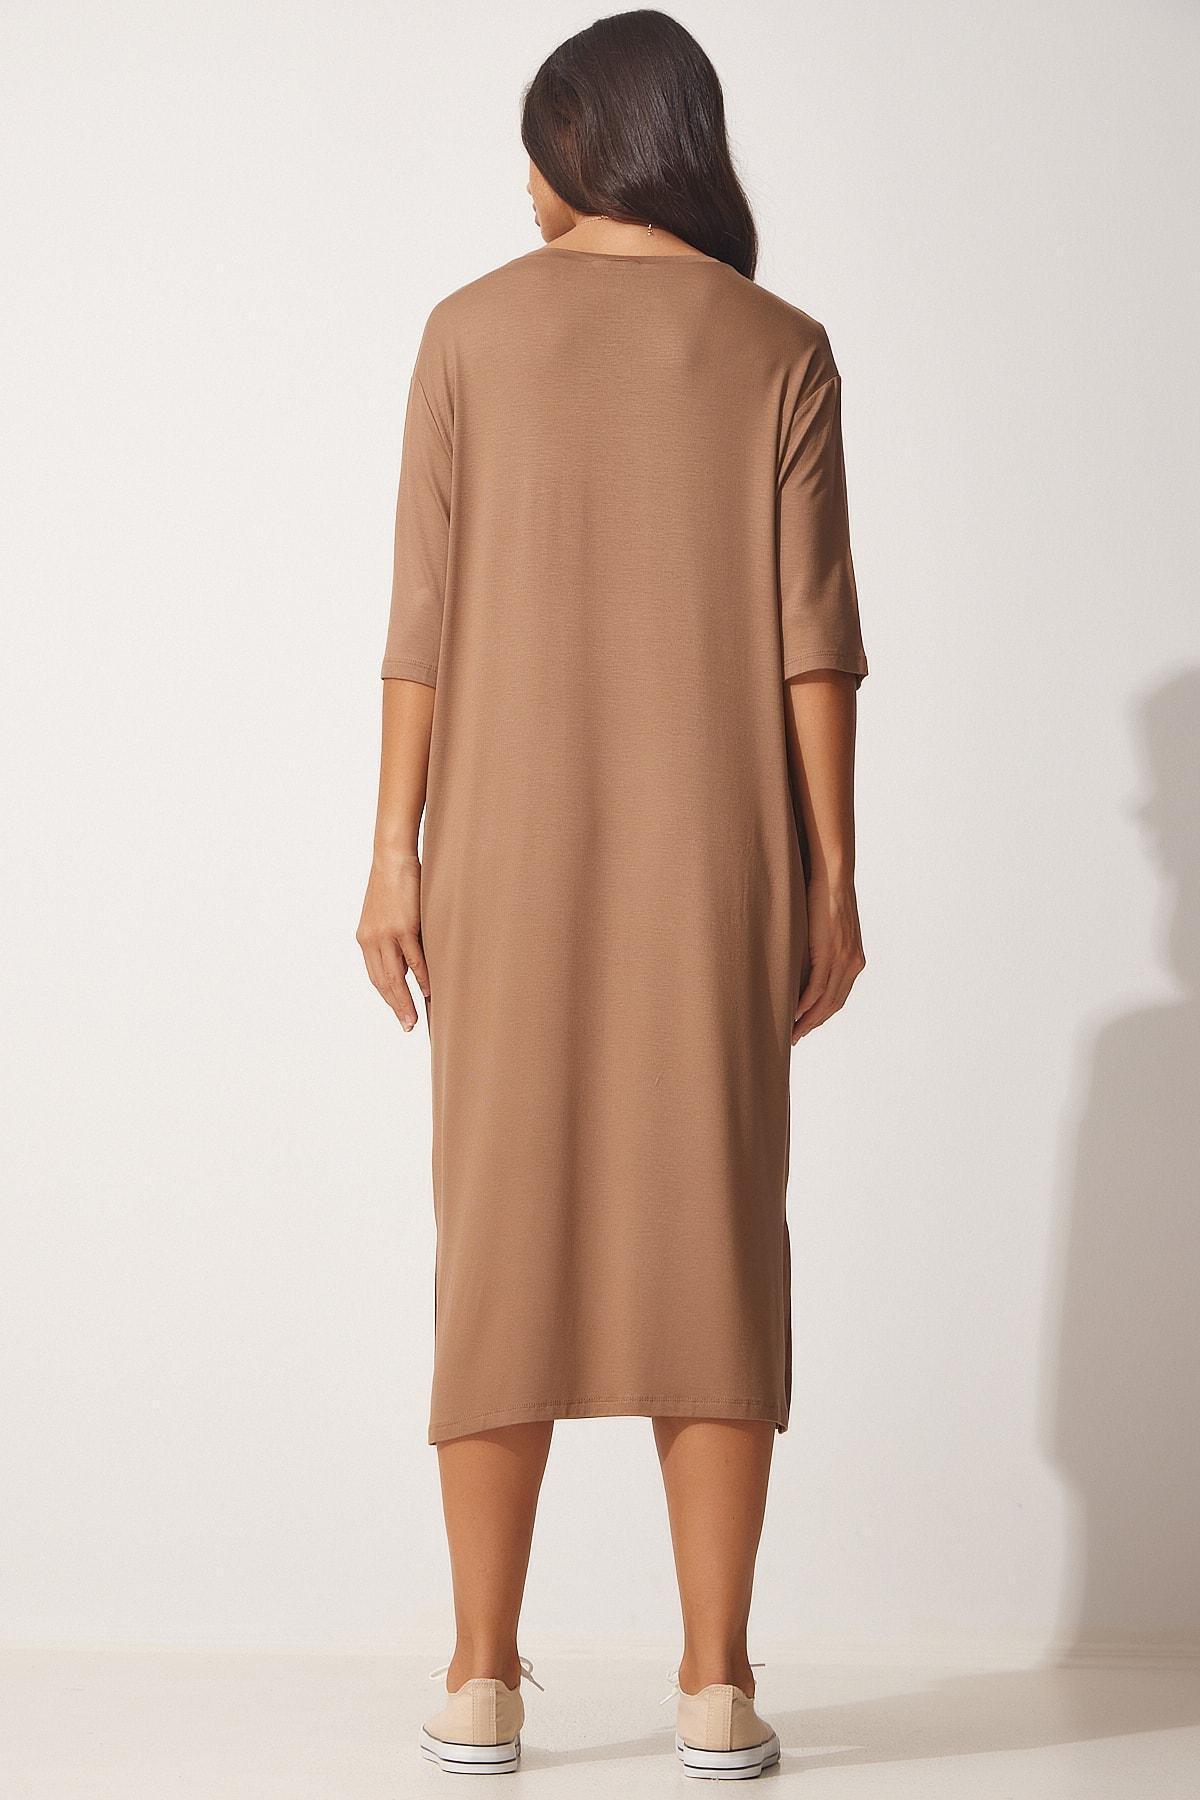 Happiness Istanbul - Brown Daily Viscose Knitted Dress